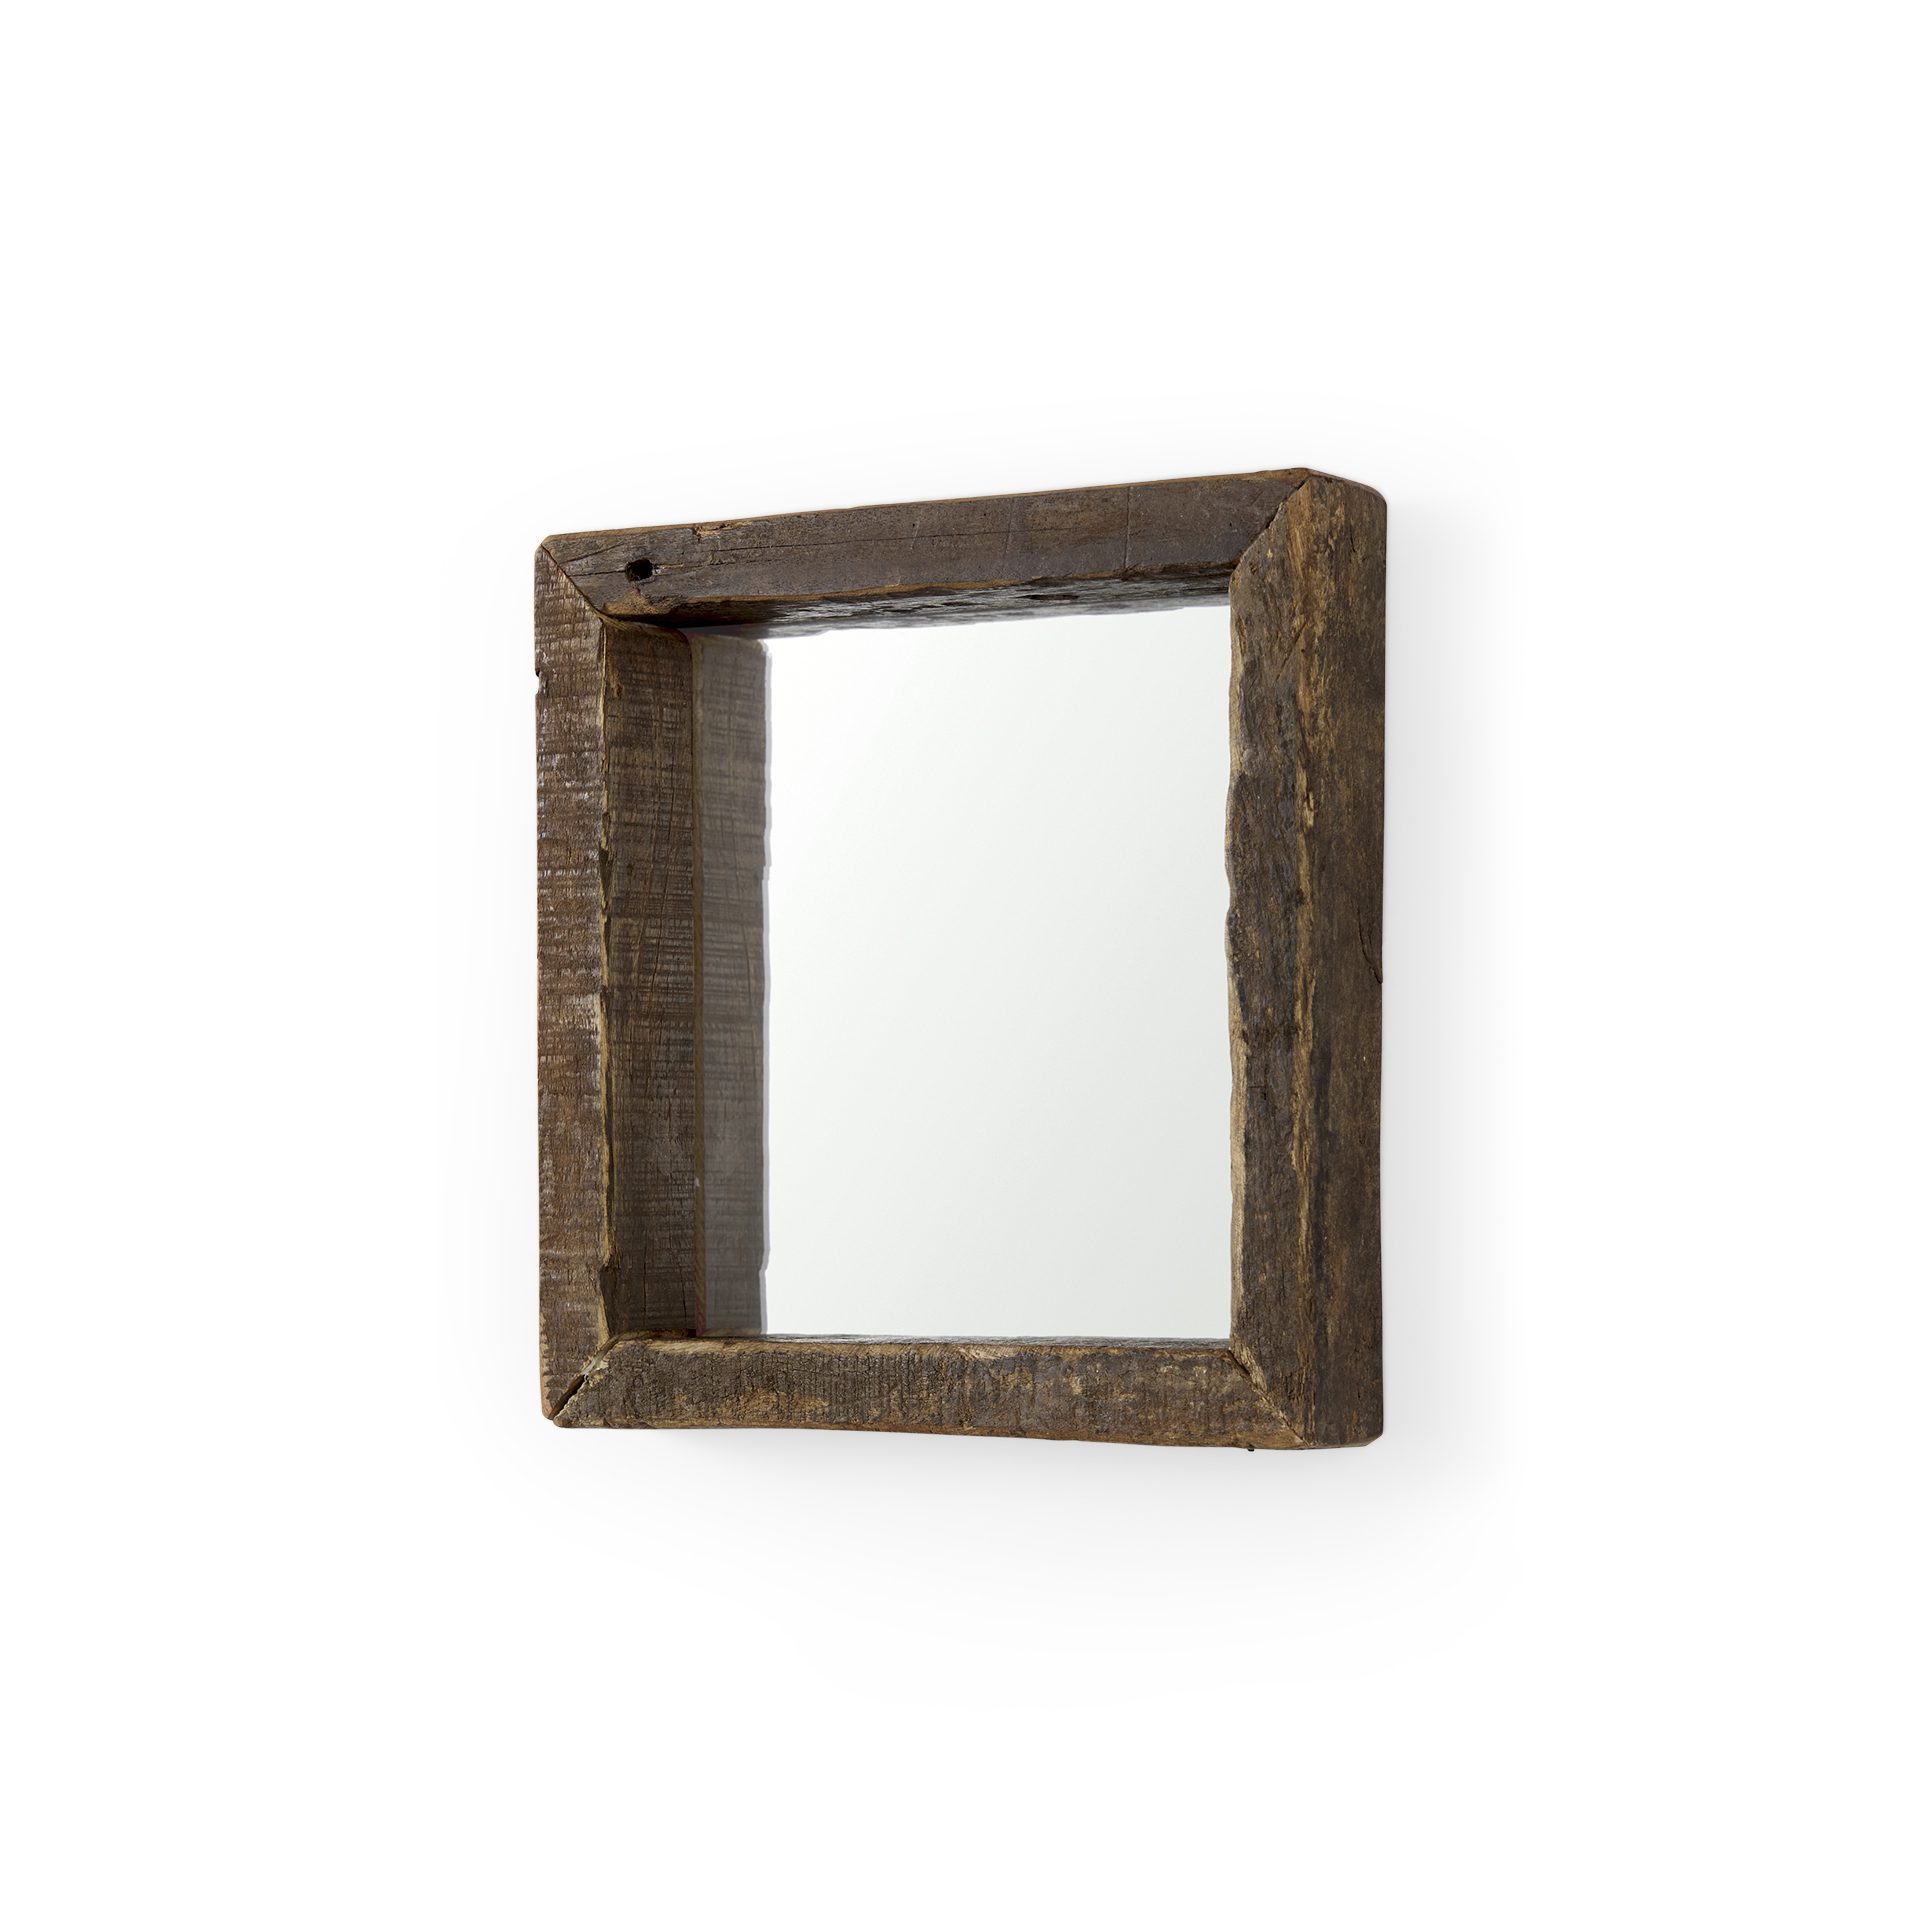 Gervaise Small Square Mirror